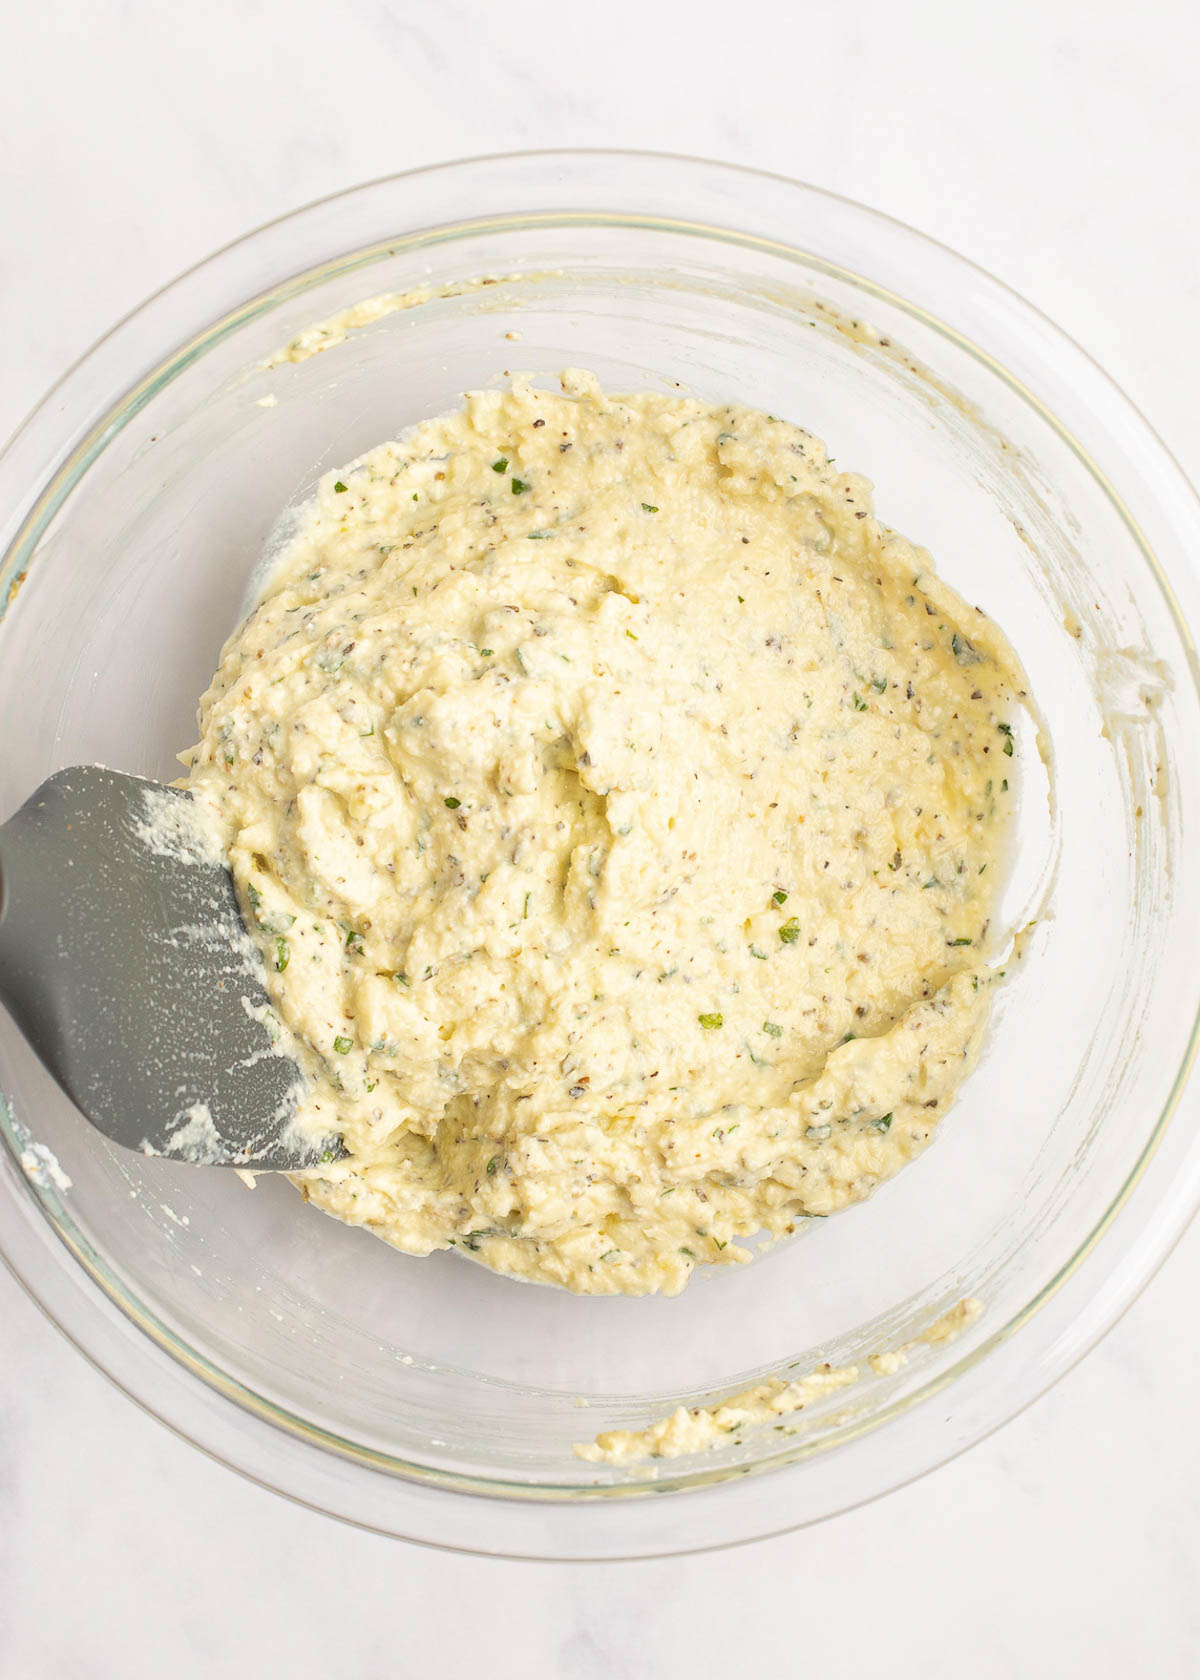 cheese, herb, and egg mixture should be stirred until creamy and well combined